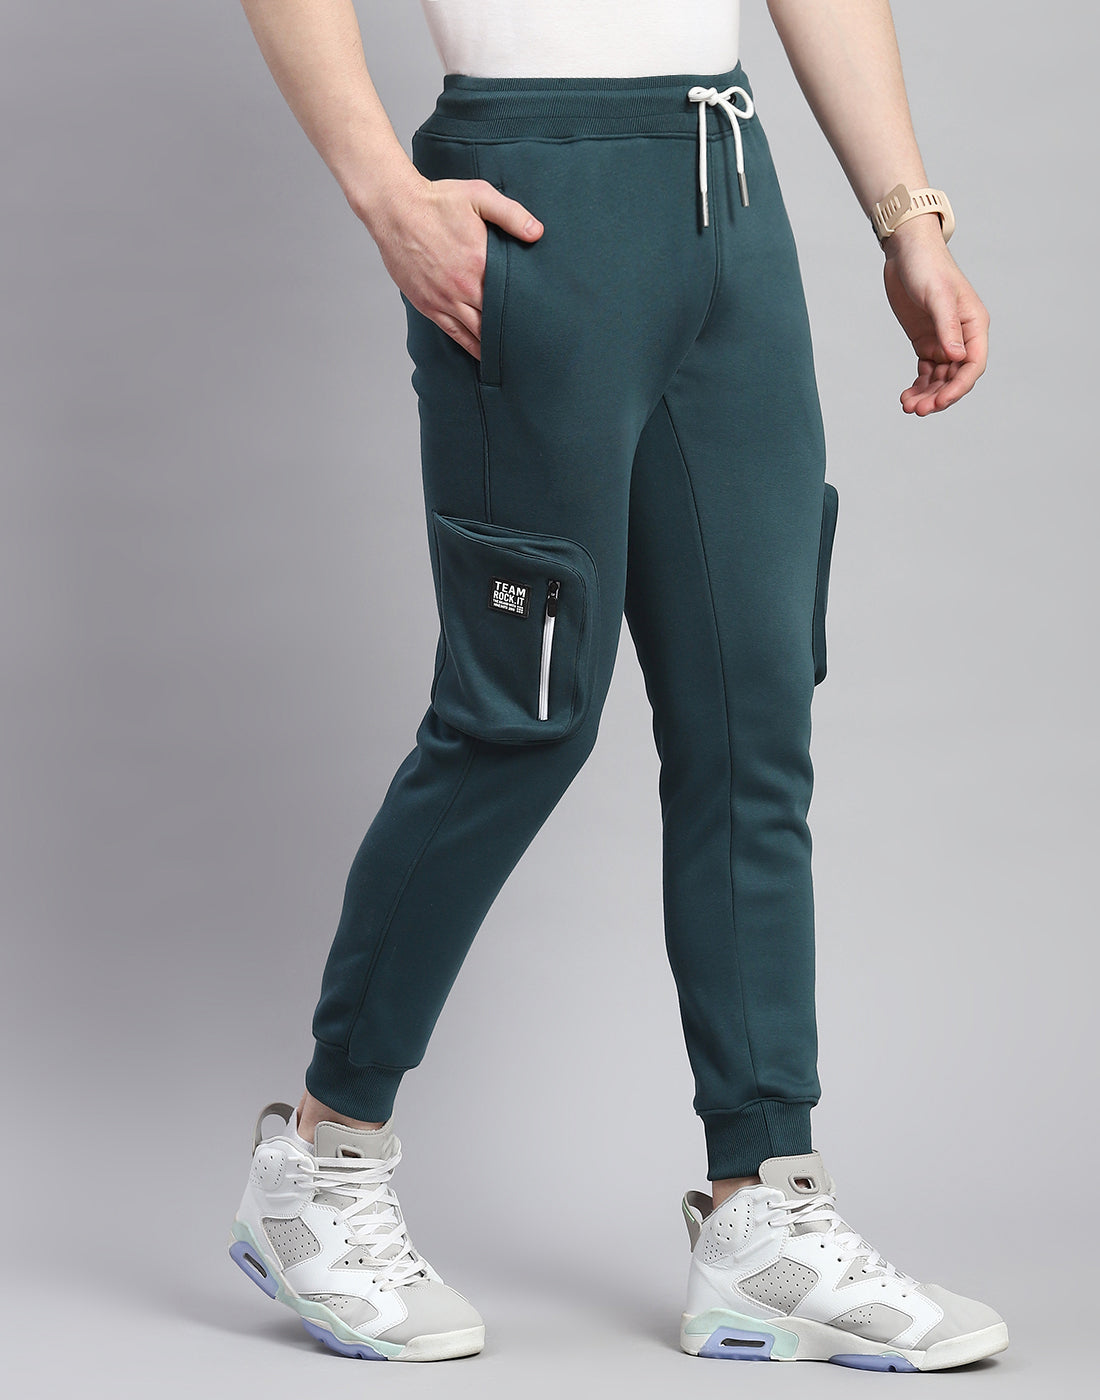 Active Wear Track Pants - Buy Track Pants & Lowers for Men Online in India